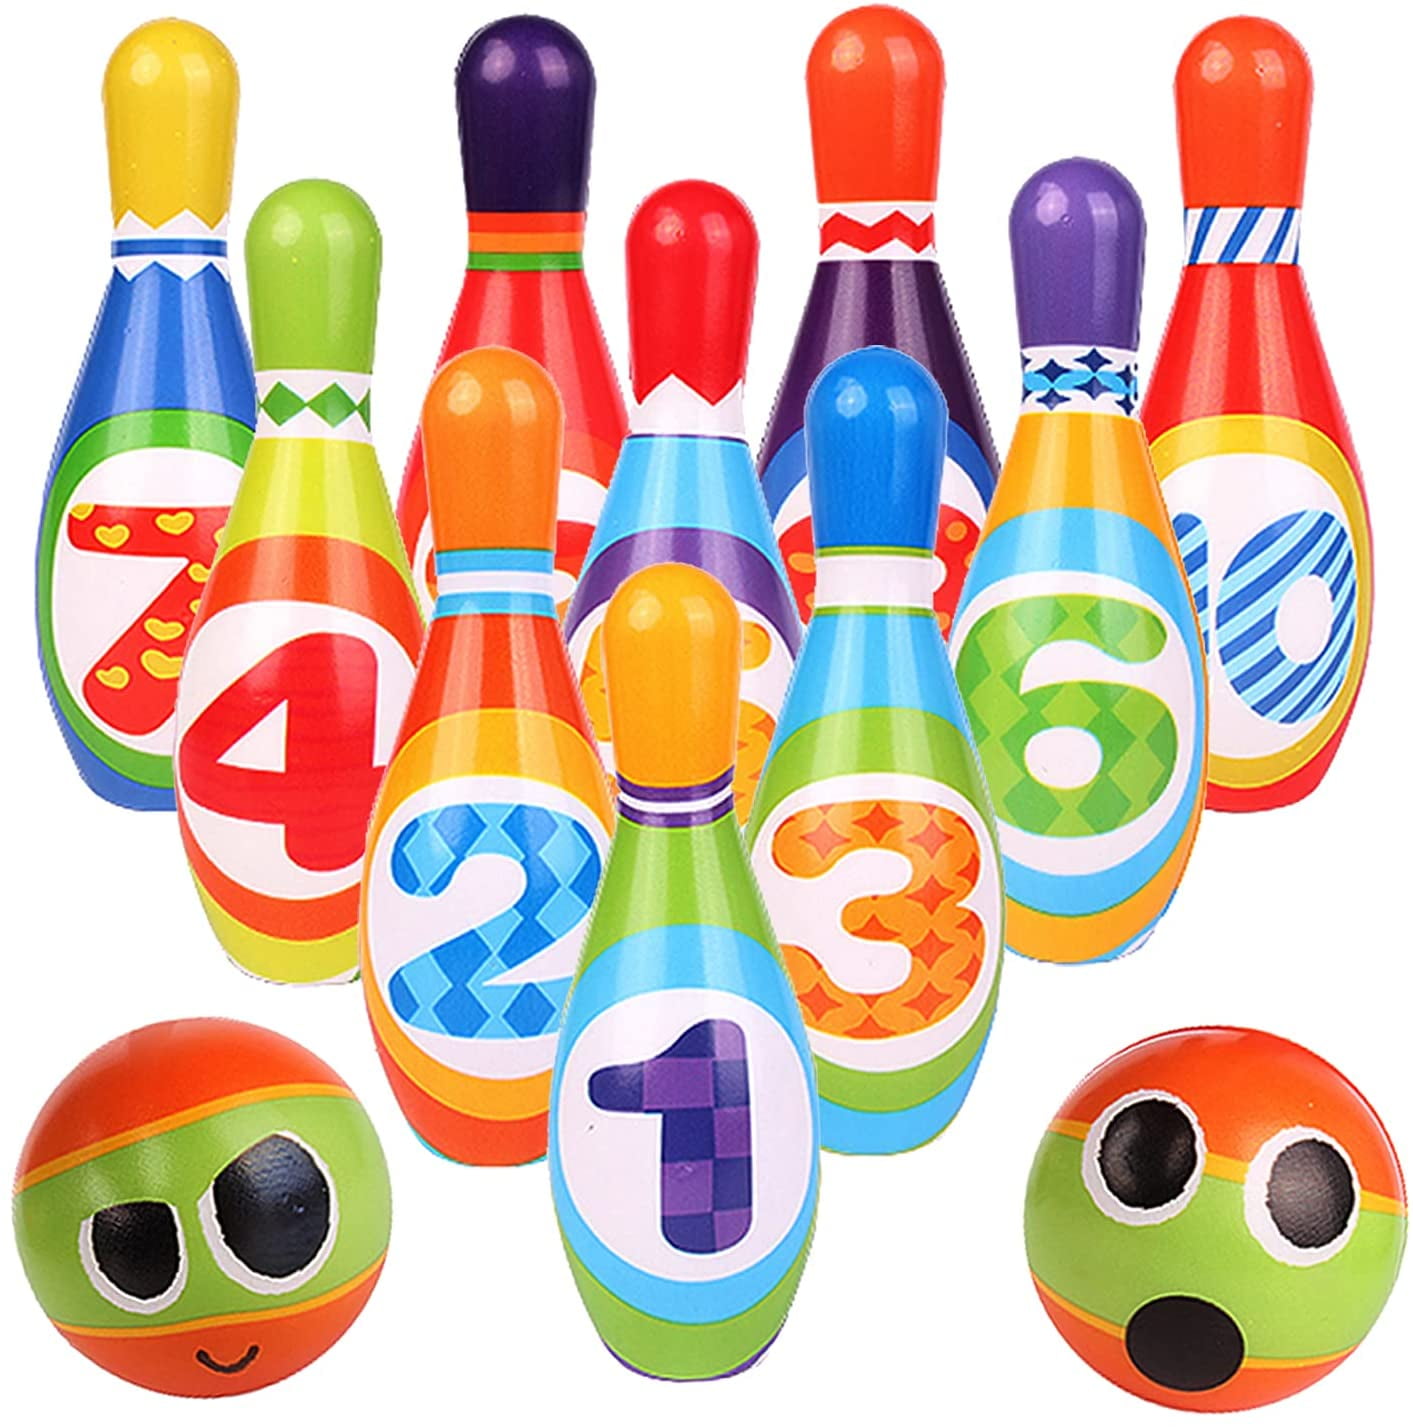 Small Plastic Bowling Set Fun Indoor Family Games with 10 Mini Pins and 2 Balls Colorful Educational Early Development Indoor Sport Alley Game for Toddlers Kids Bowling Toy Set 